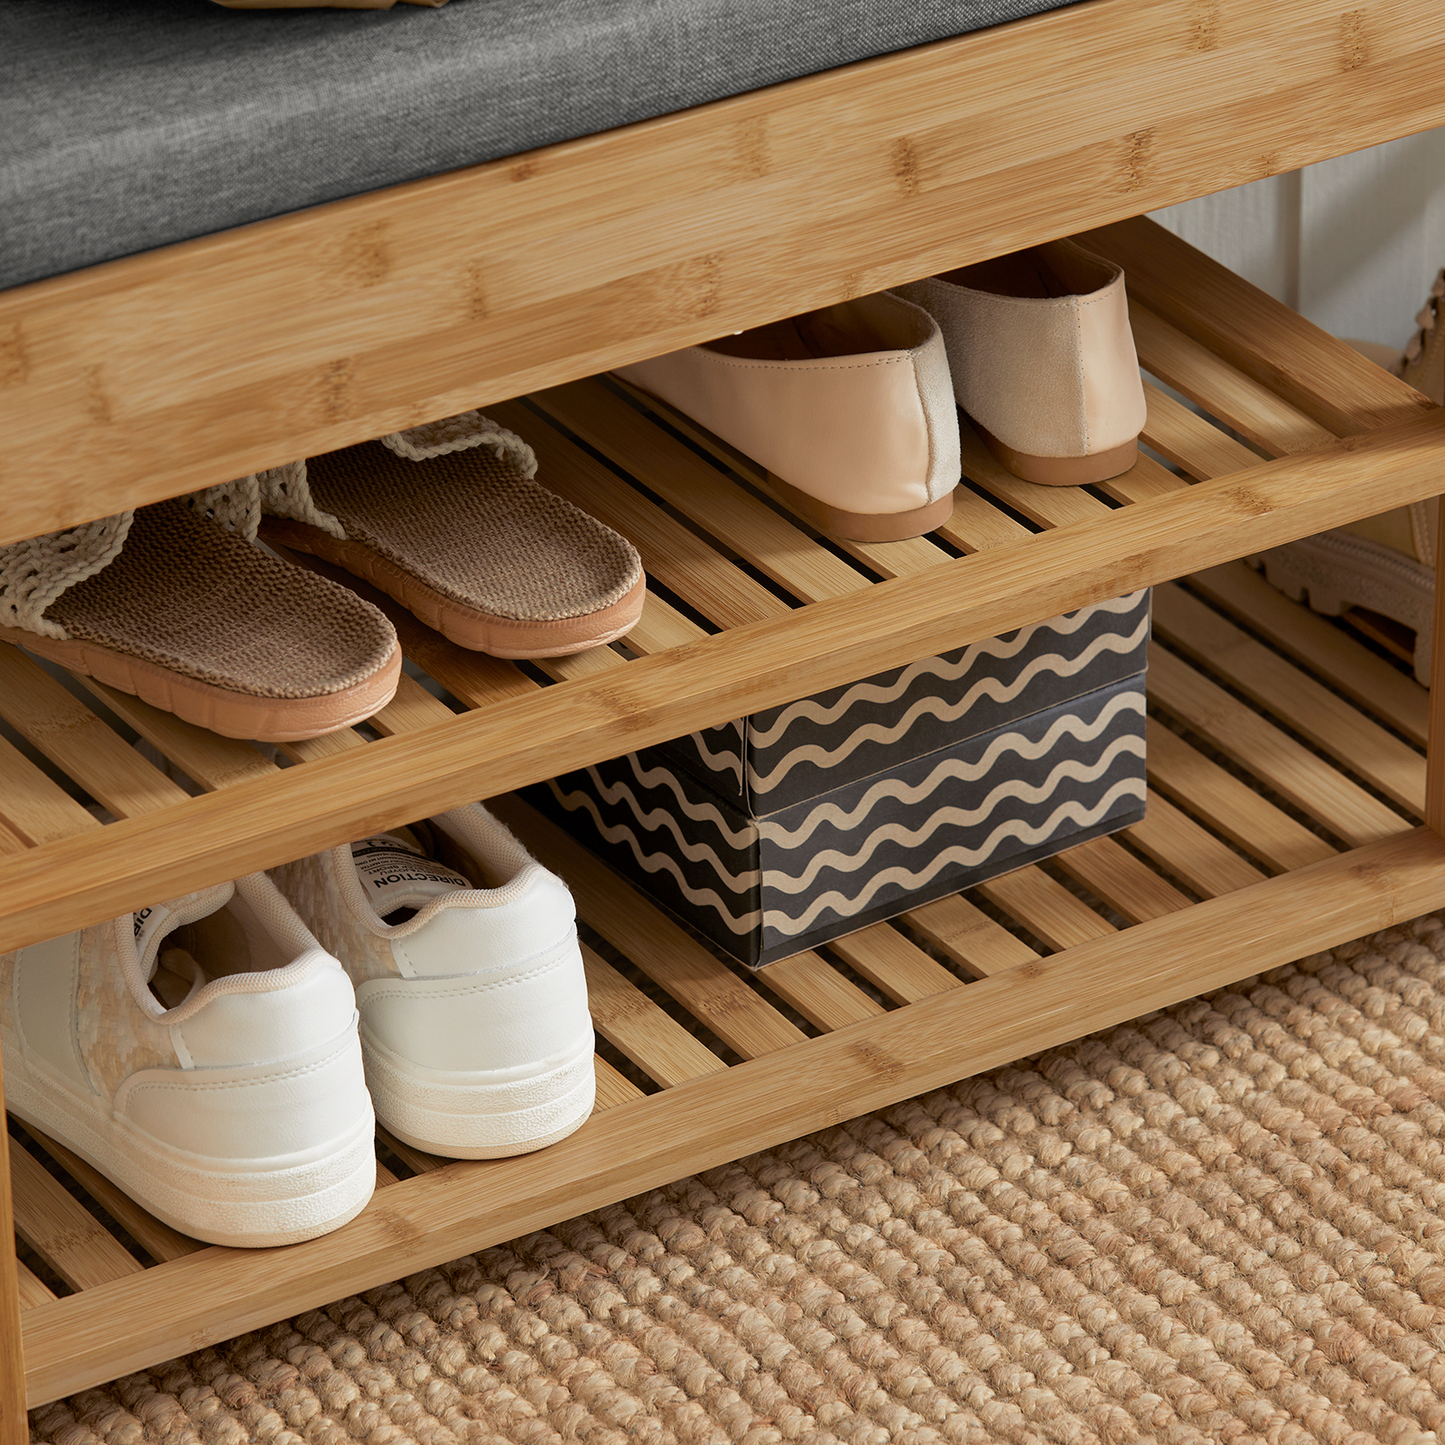 SoBuy FSR47-N Bamboo Shoe Bench with Drawers and Lift Top